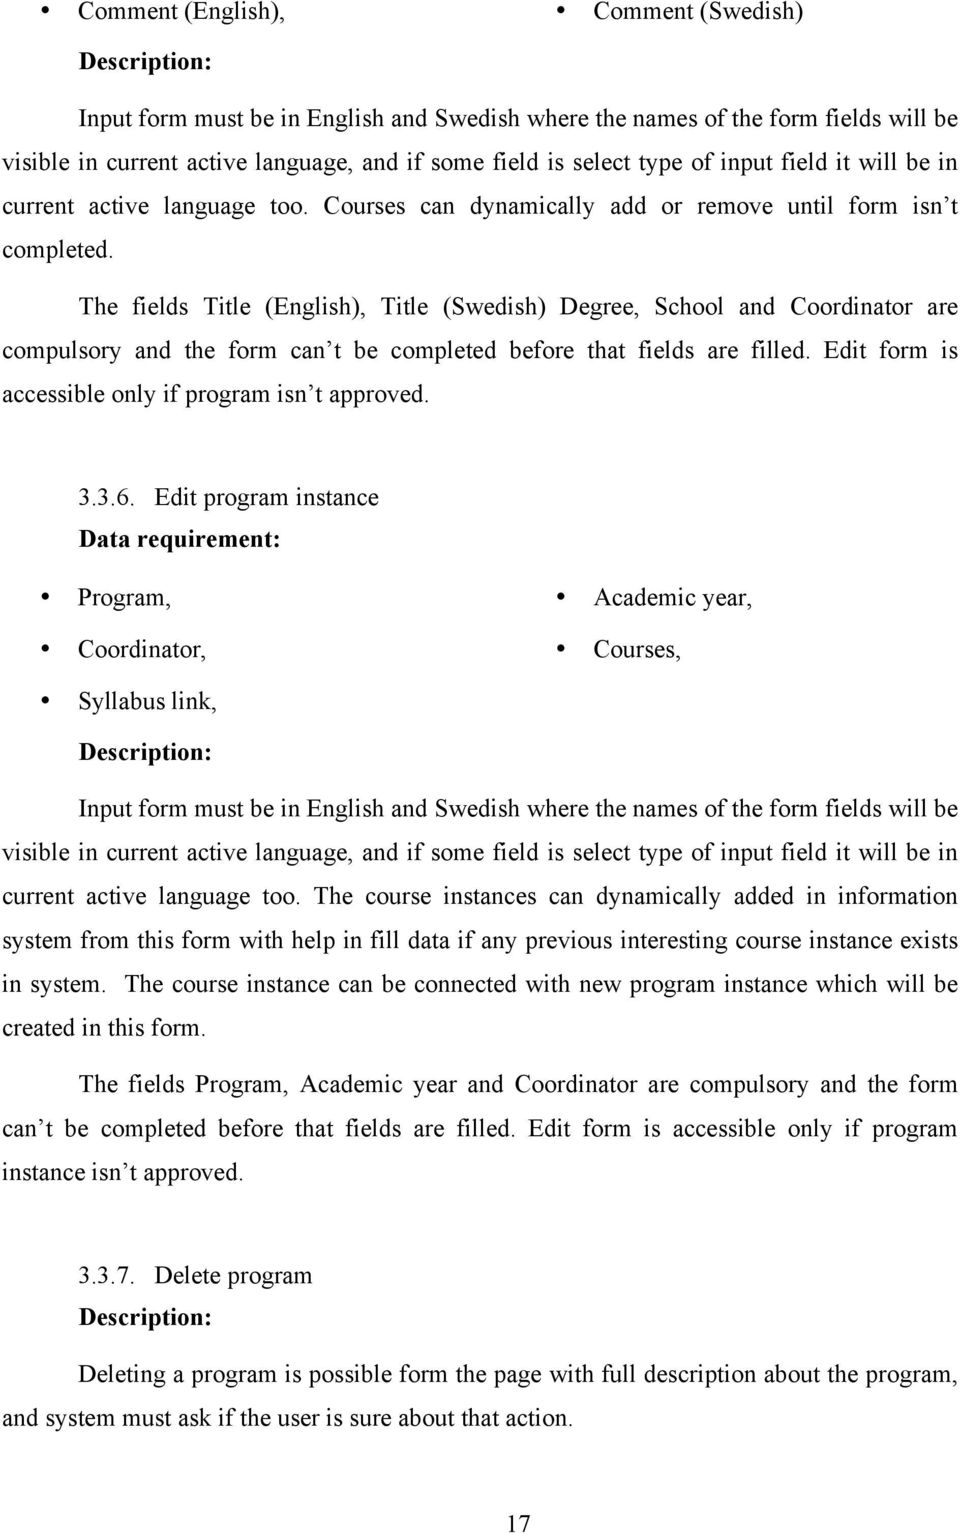 The fields Title (English), Title (Swedish) Degree, School and Coordinator are compulsory and the form can t be completed before that fields are filled.